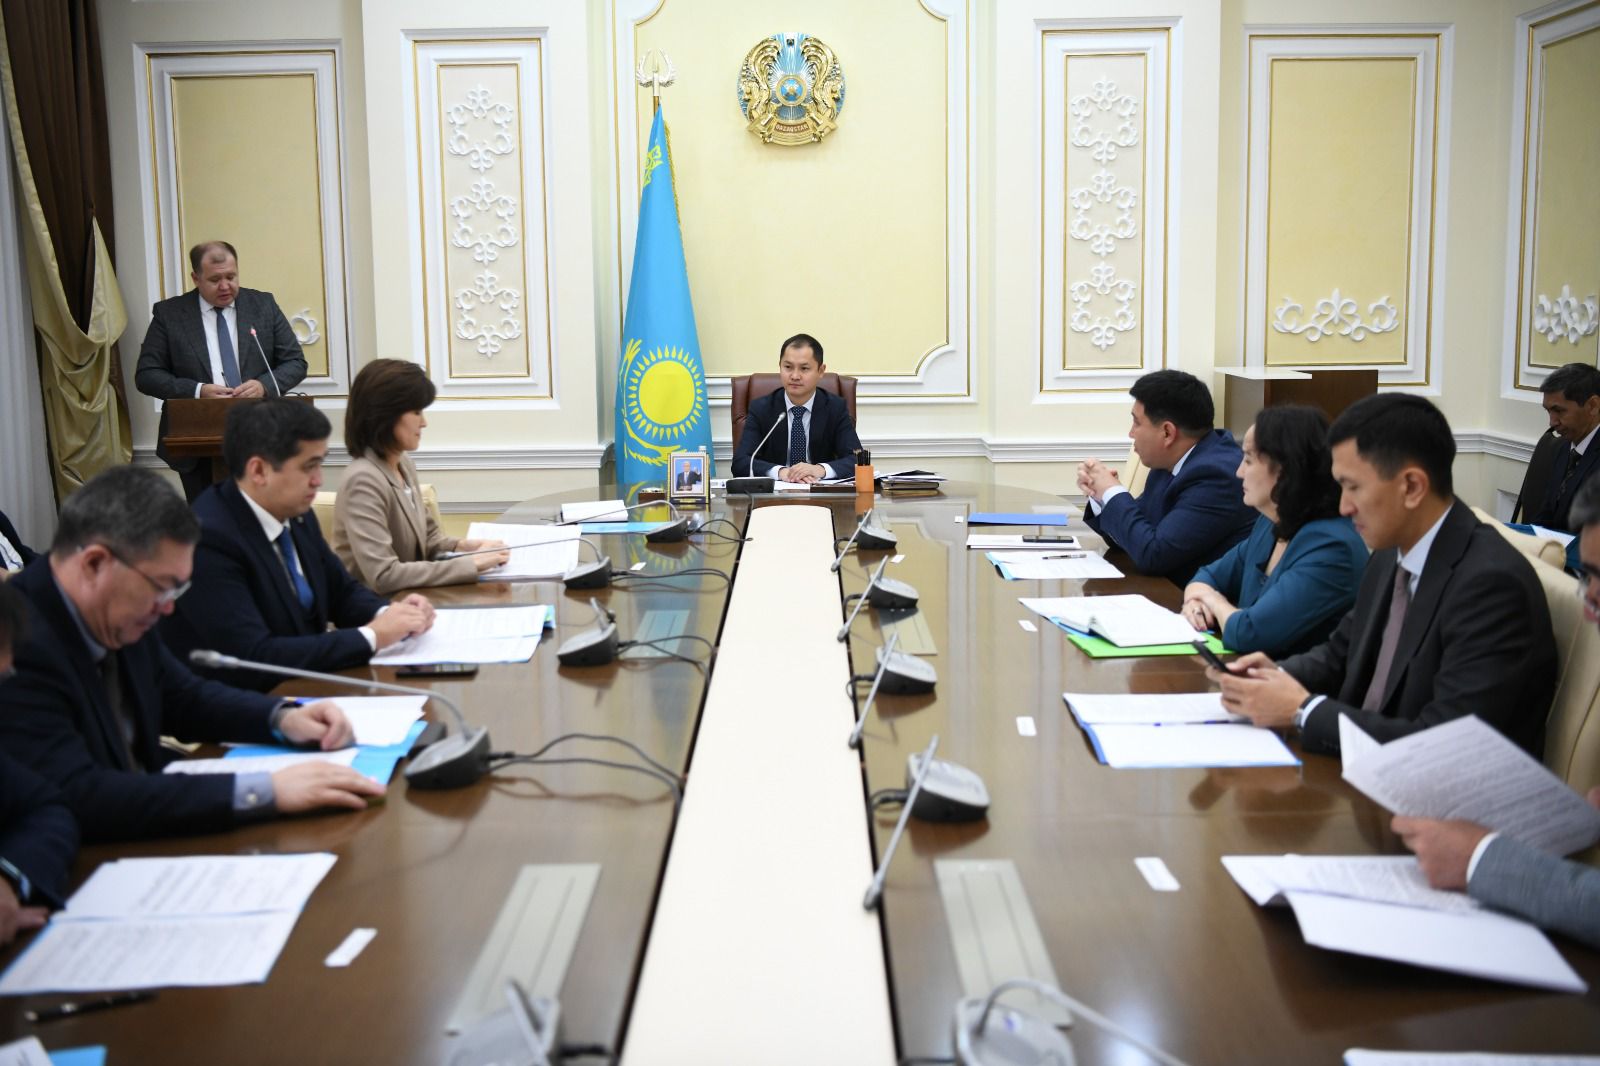 A meeting of the regional trilateral commission was held